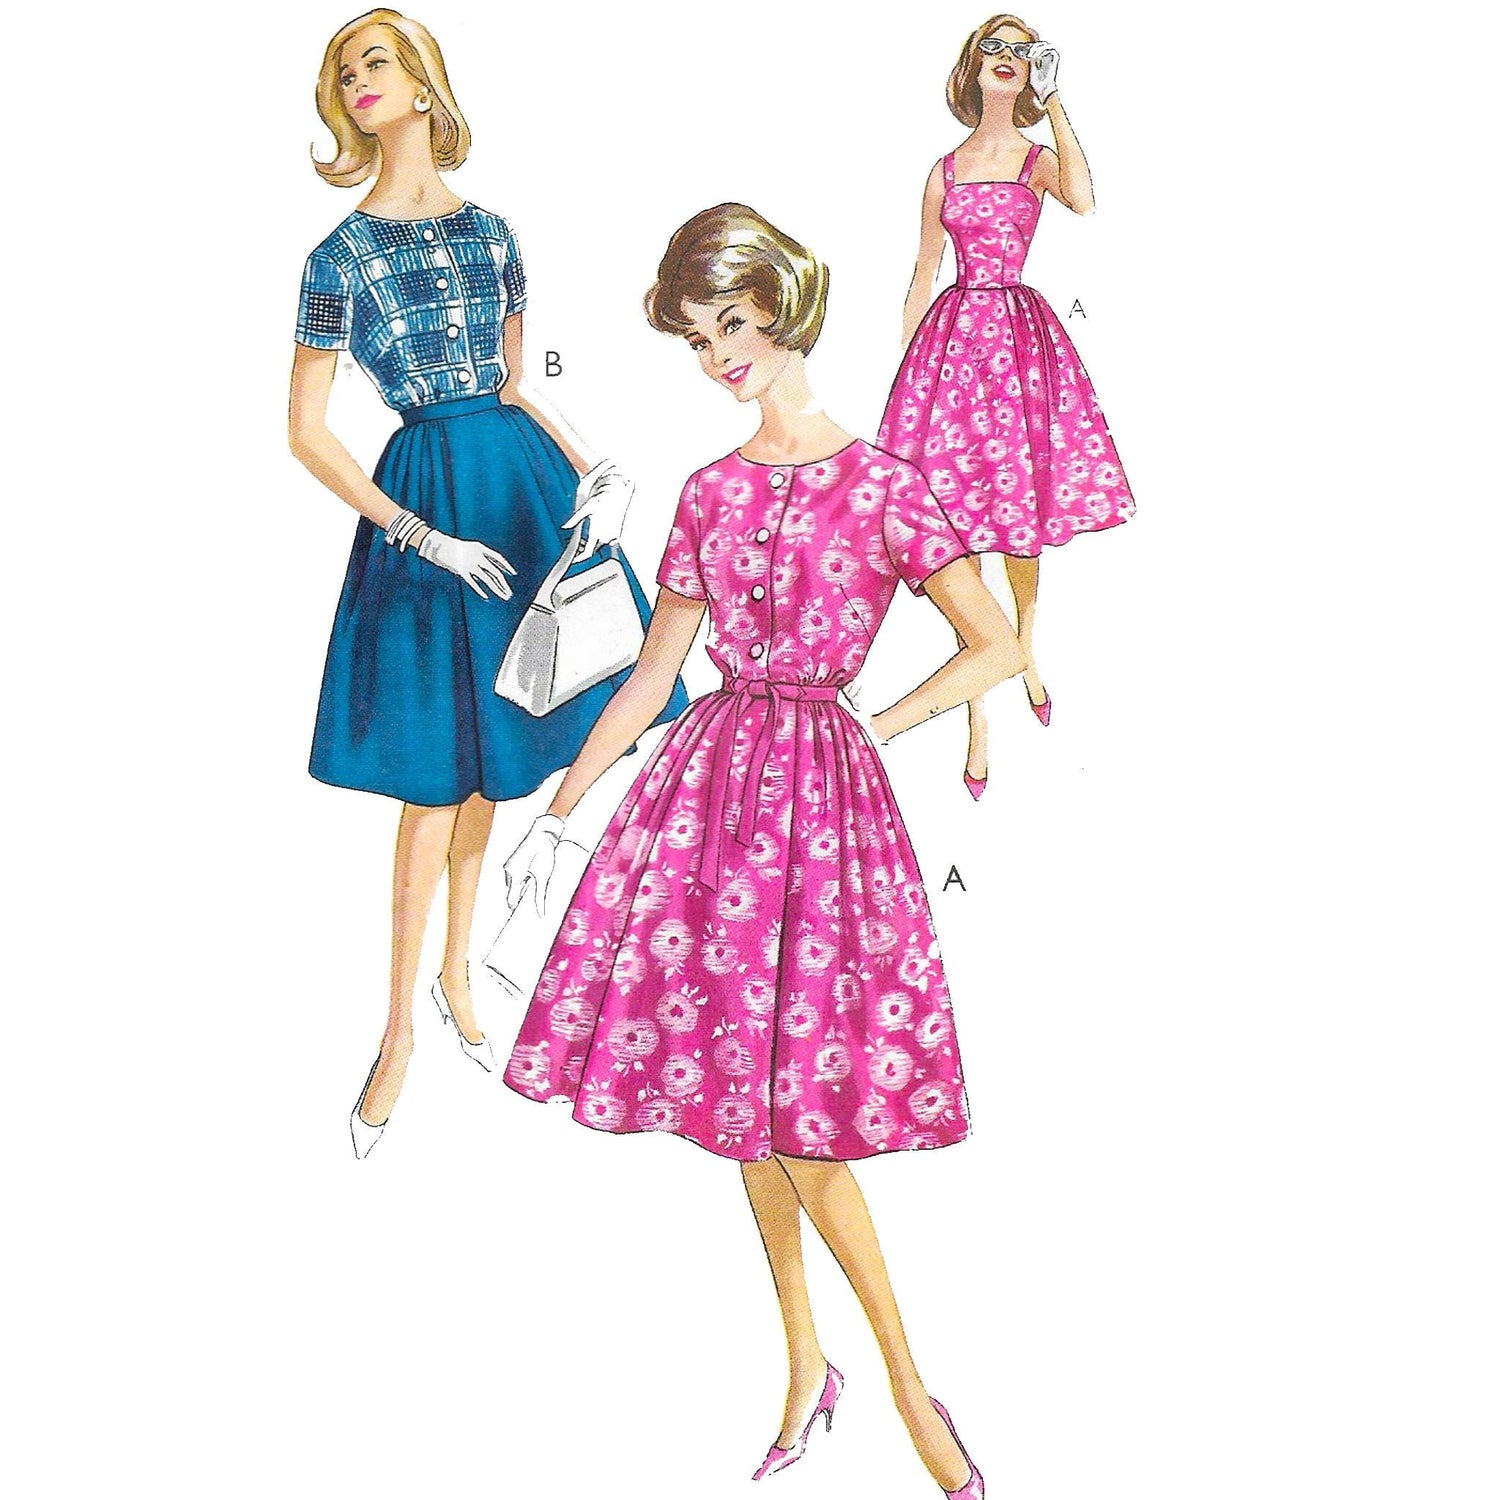 Women wearing a summer or party dress made up from ST386 sewing pattern